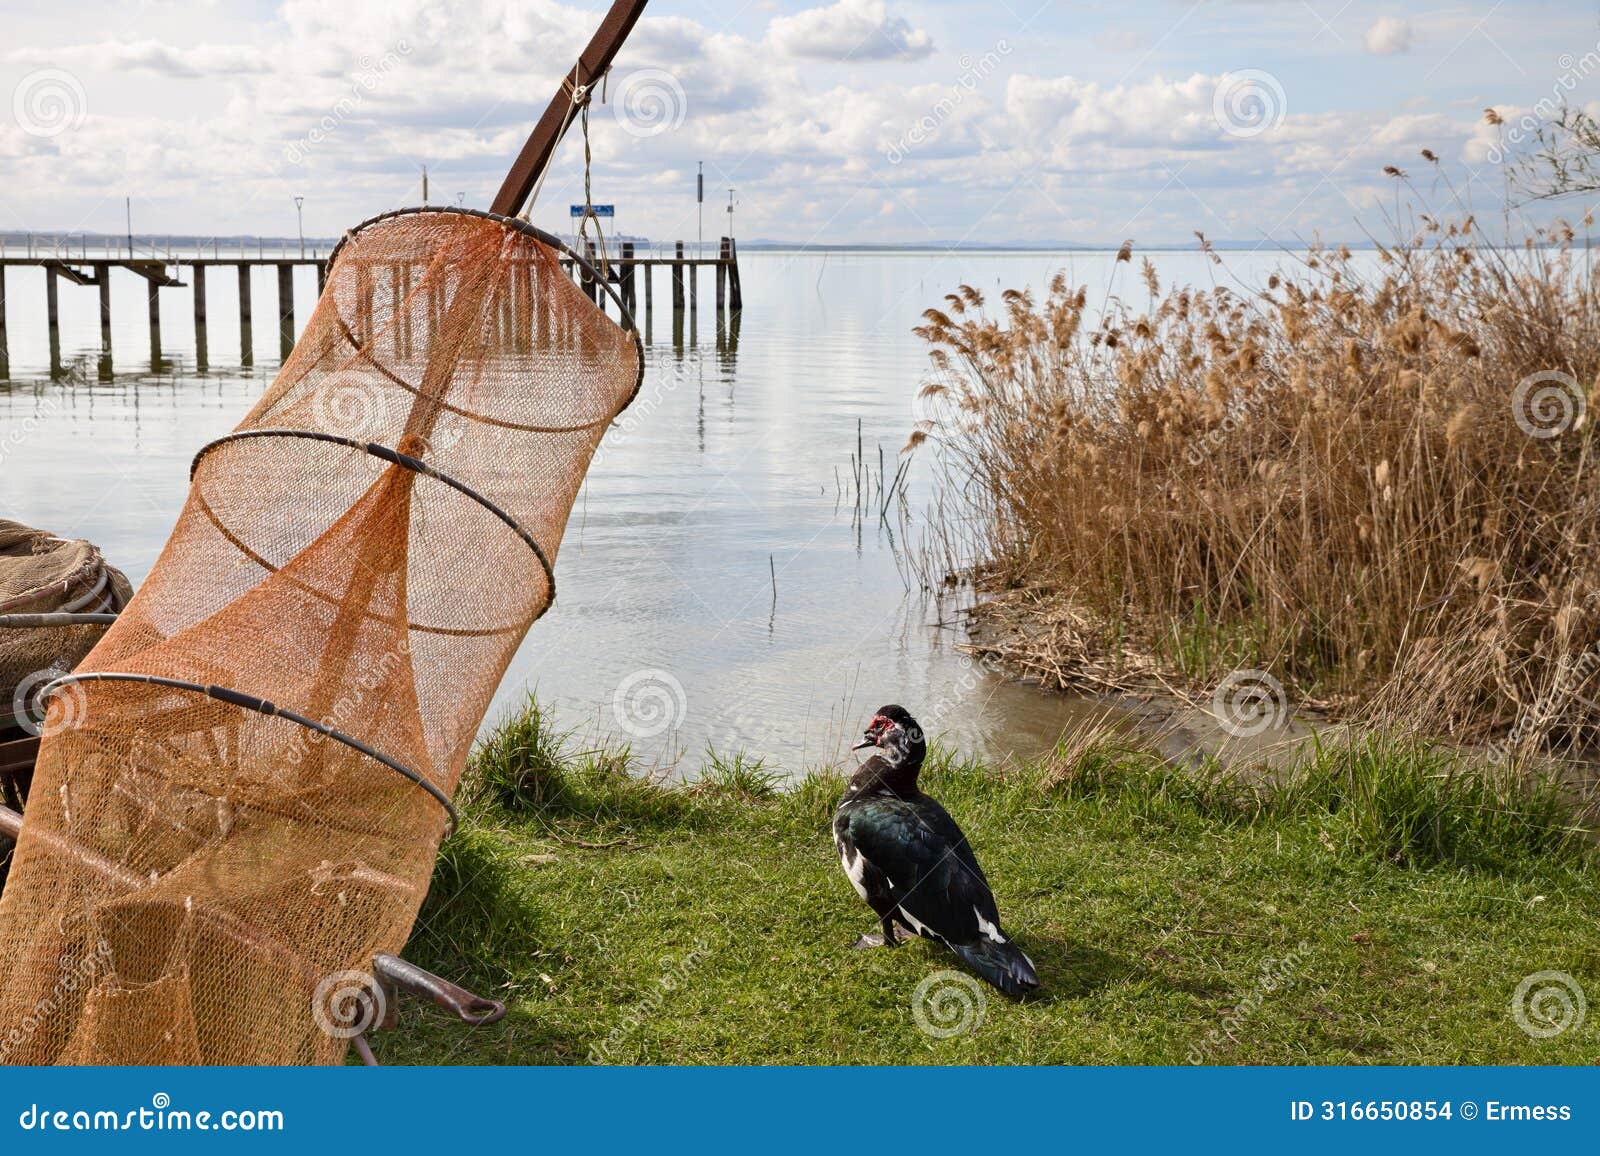 lake trasimeno, magione, perugia, umbria, italy: view of the shore with a muscovy duck